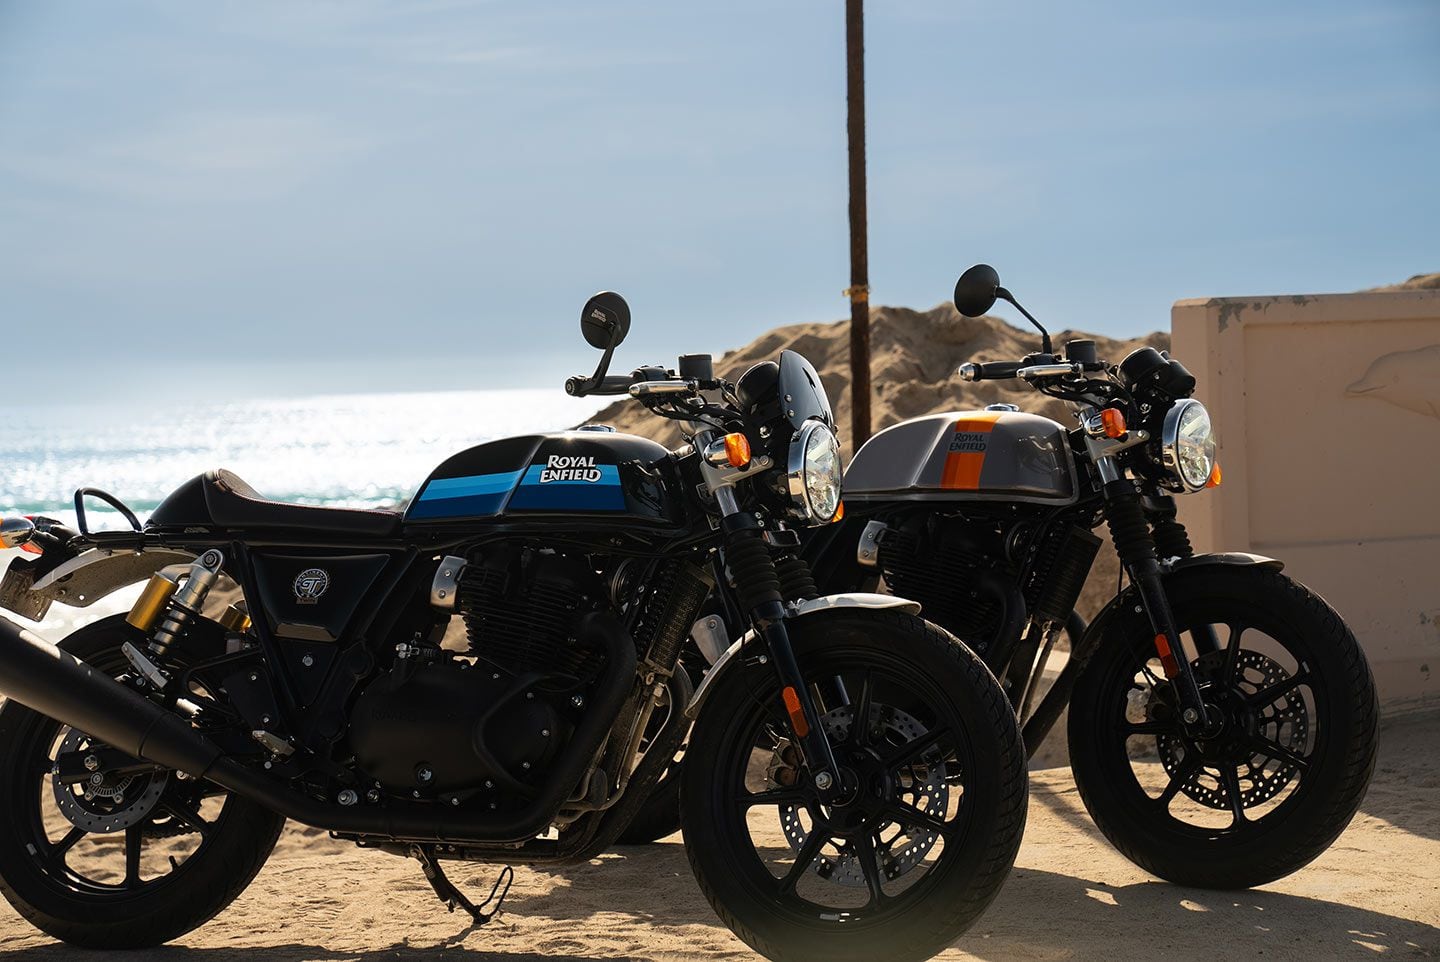 The GT 650 in Slipstream Blue sports Enfield’s small wind deflector above its headlight, while the Apex Grey shows the bike’s stock style.